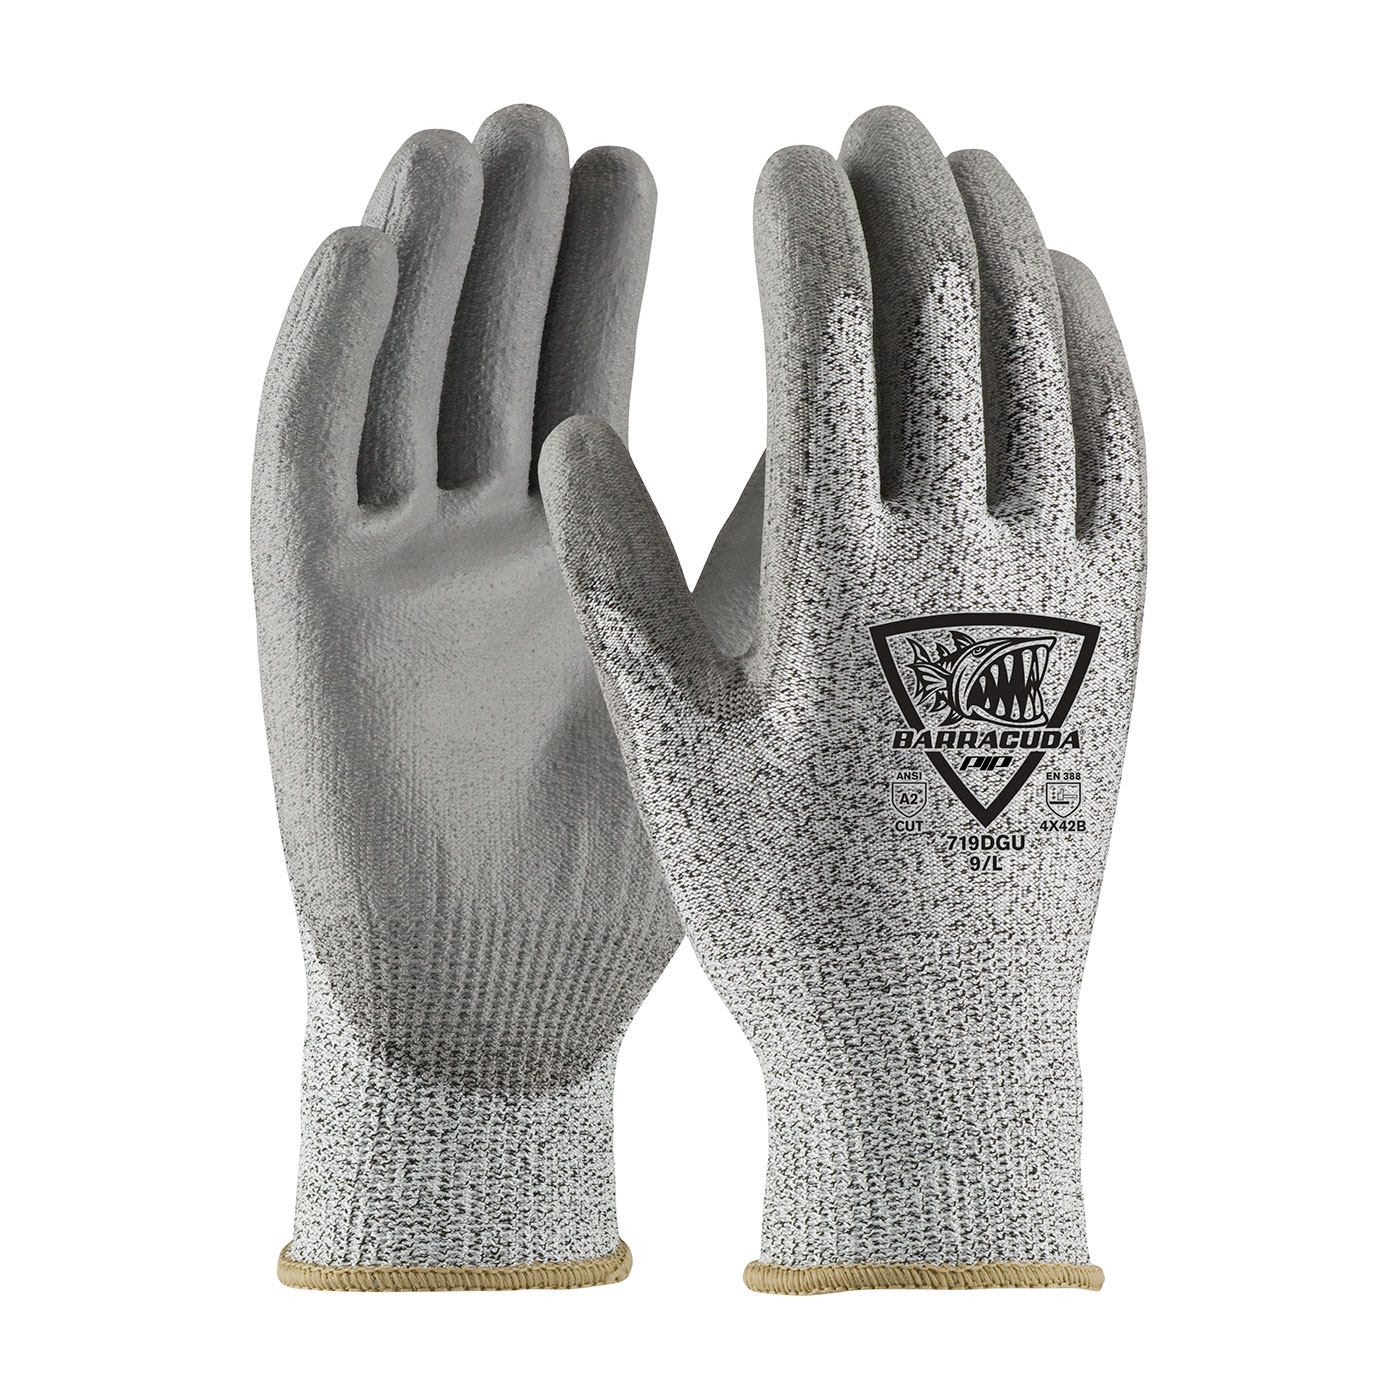 Barracuda® Seamless Knit HPPE Blended Glove with Polyurethane Coated Flat Grip on Palm & Fingers - Cut Resistant